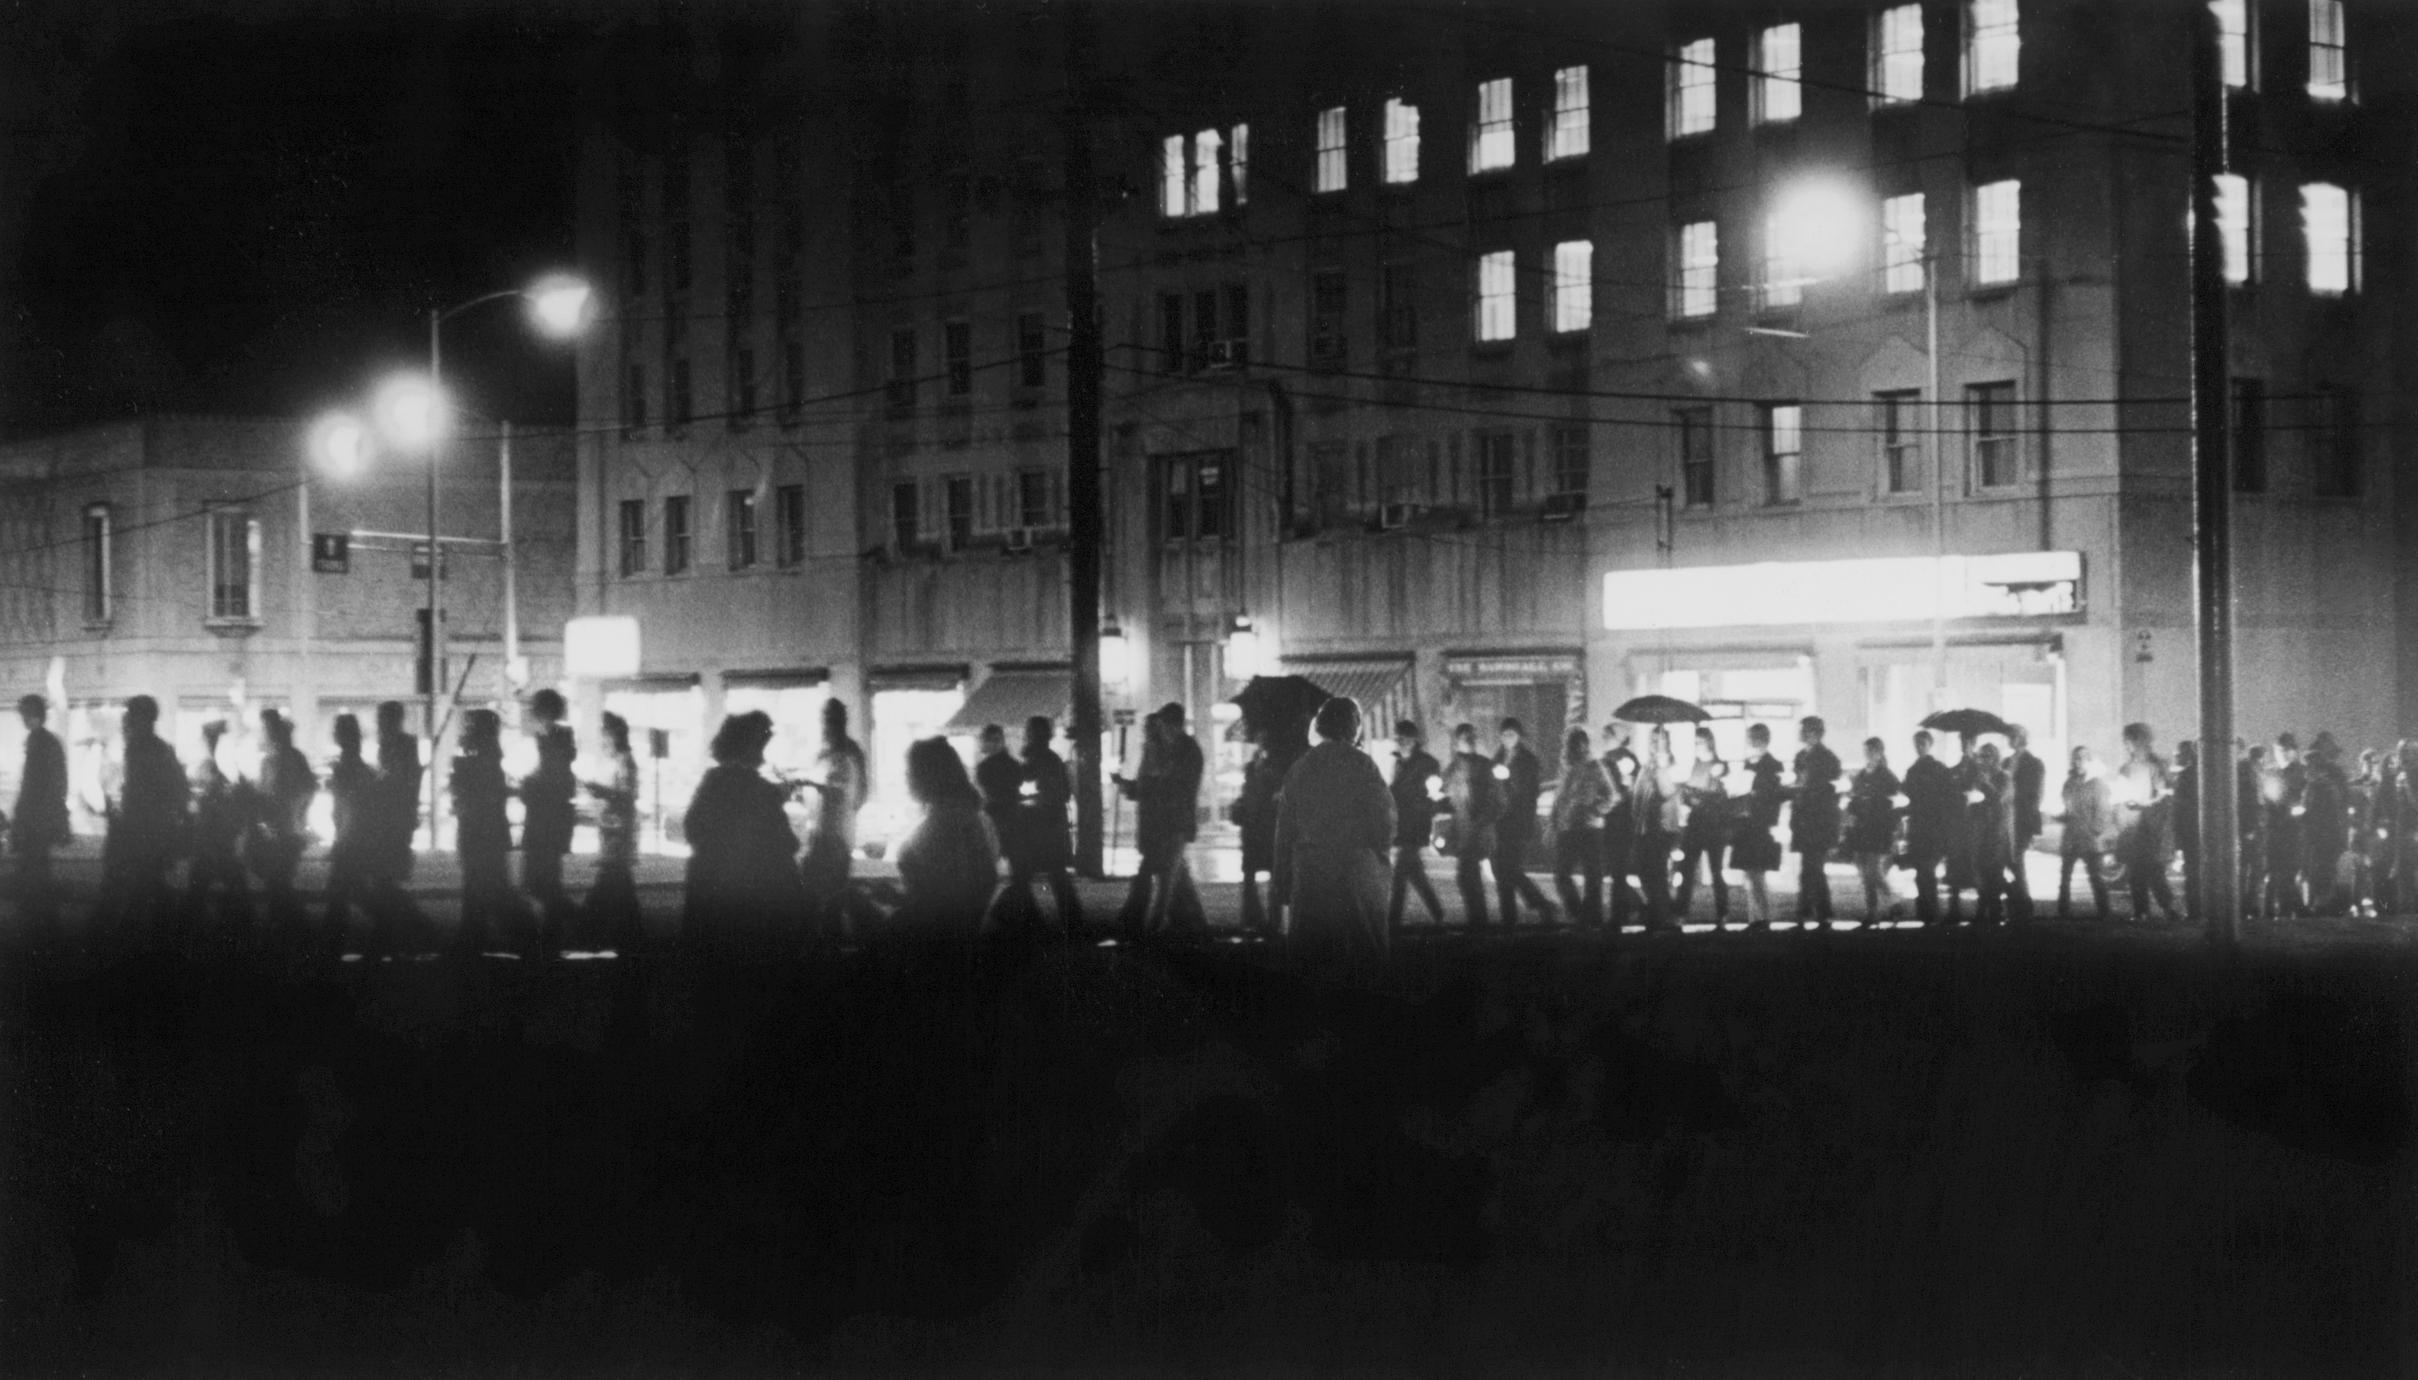 A black and white photo of people holding umbrellas marching through the darkness by candlelight